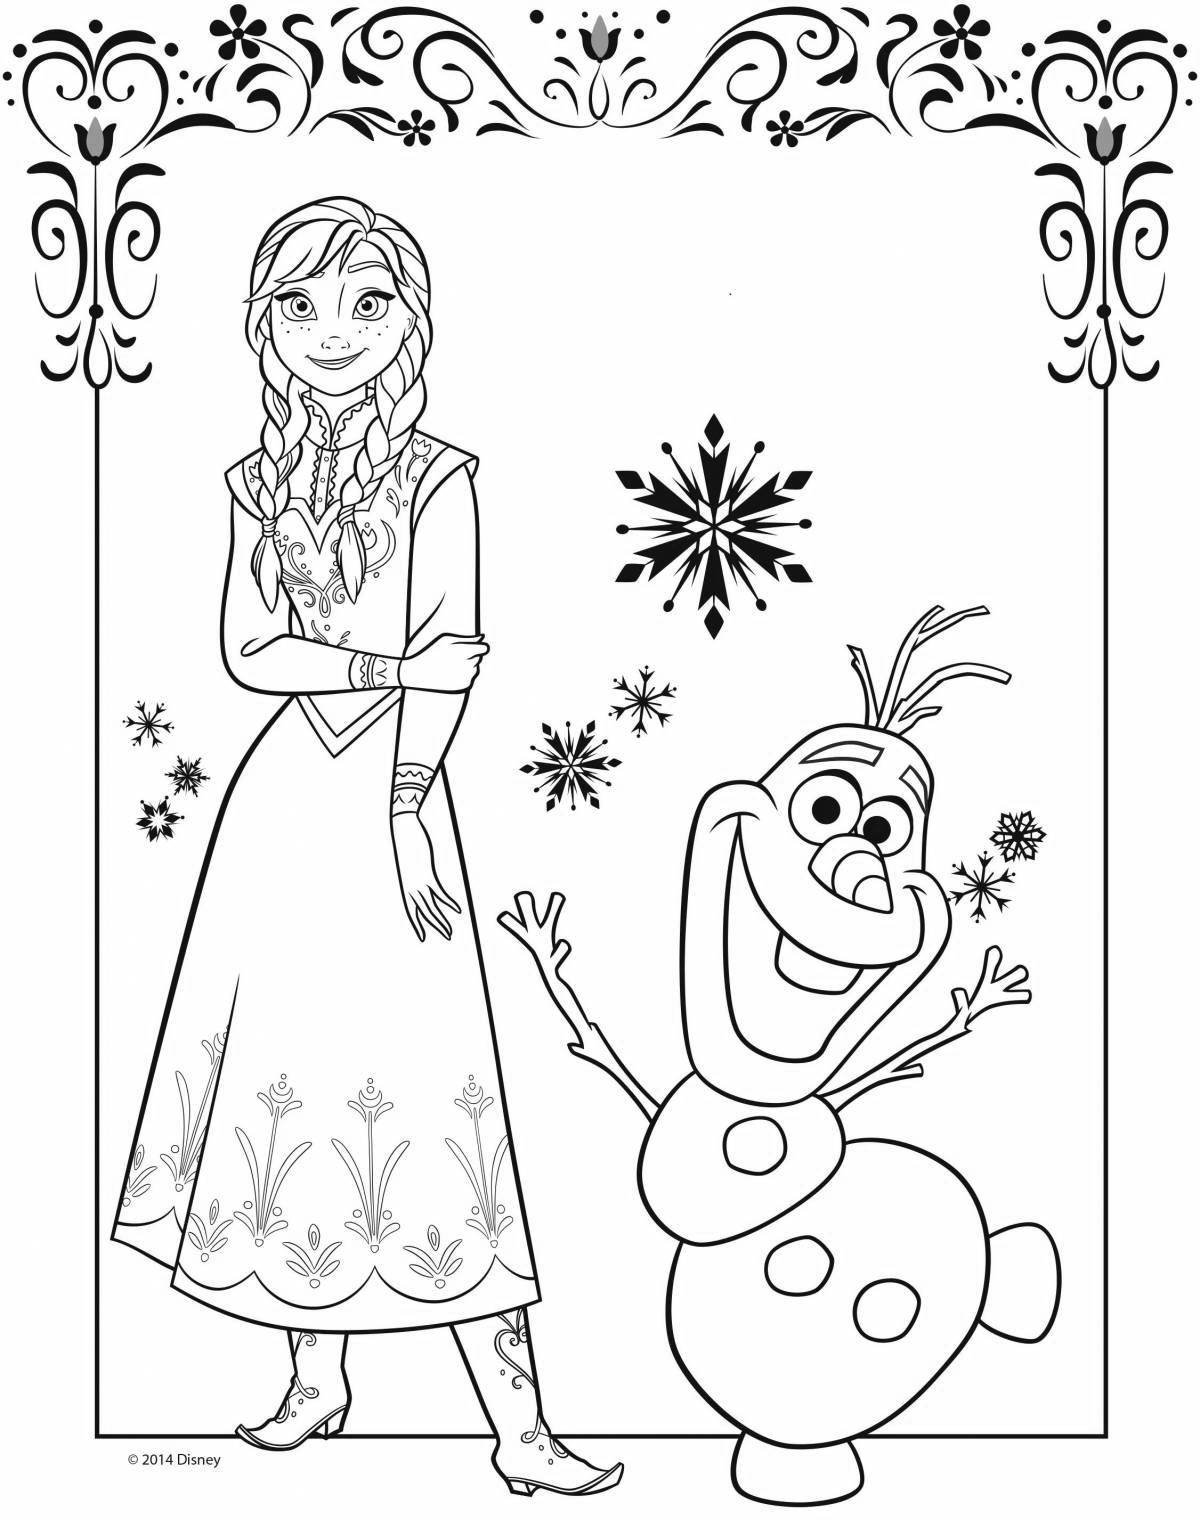 Great Frozen coloring book for 6-7 year olds